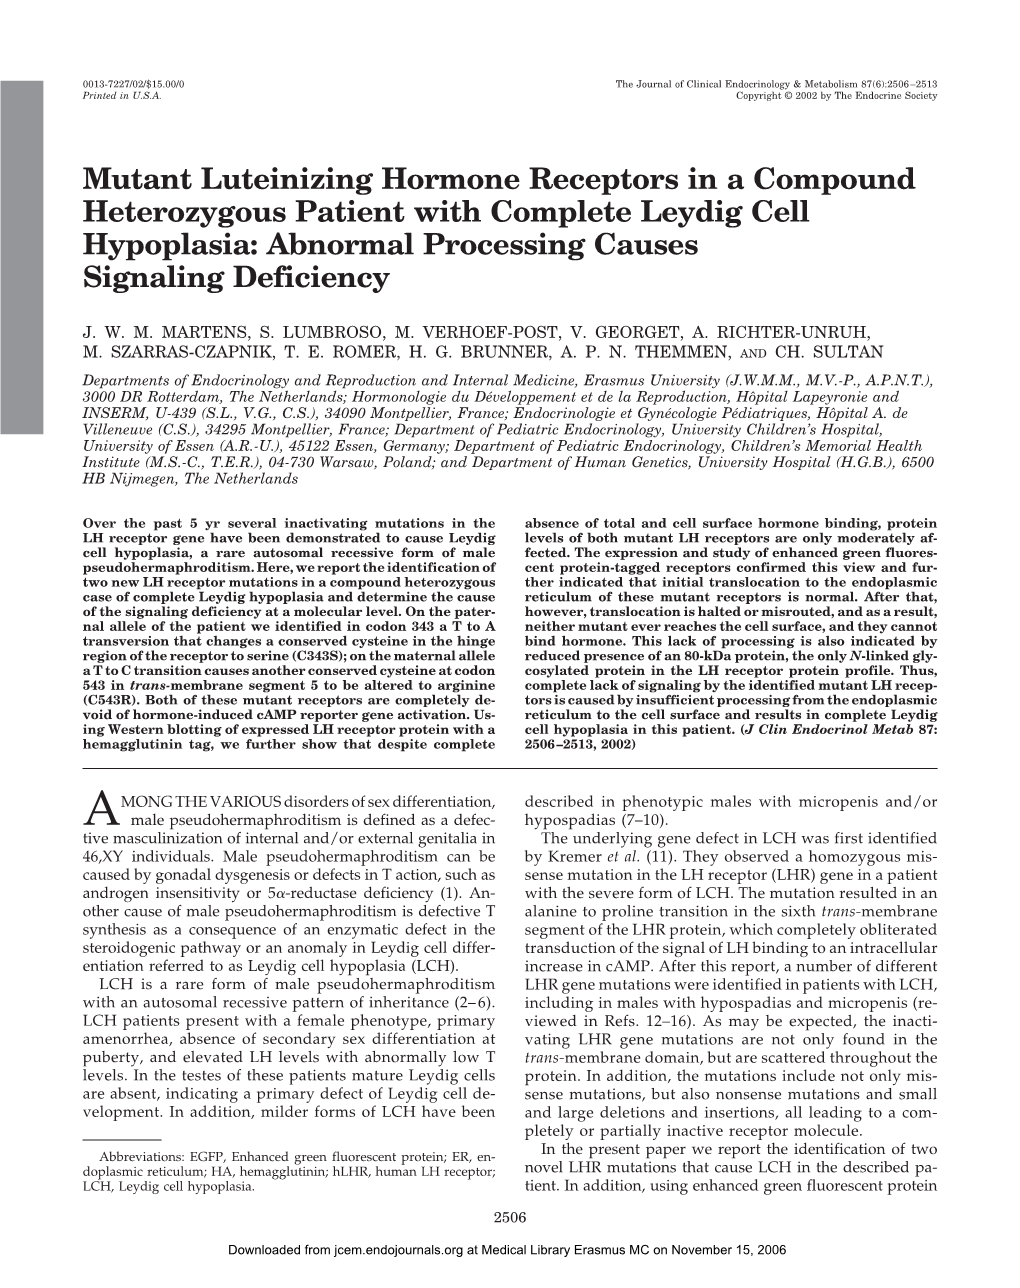 Mutant Luteinizing Hormone Receptors in a Compound Heterozygous Patient with Complete Leydig Cell Hypoplasia: Abnormal Processing Causes Signaling Deficiency